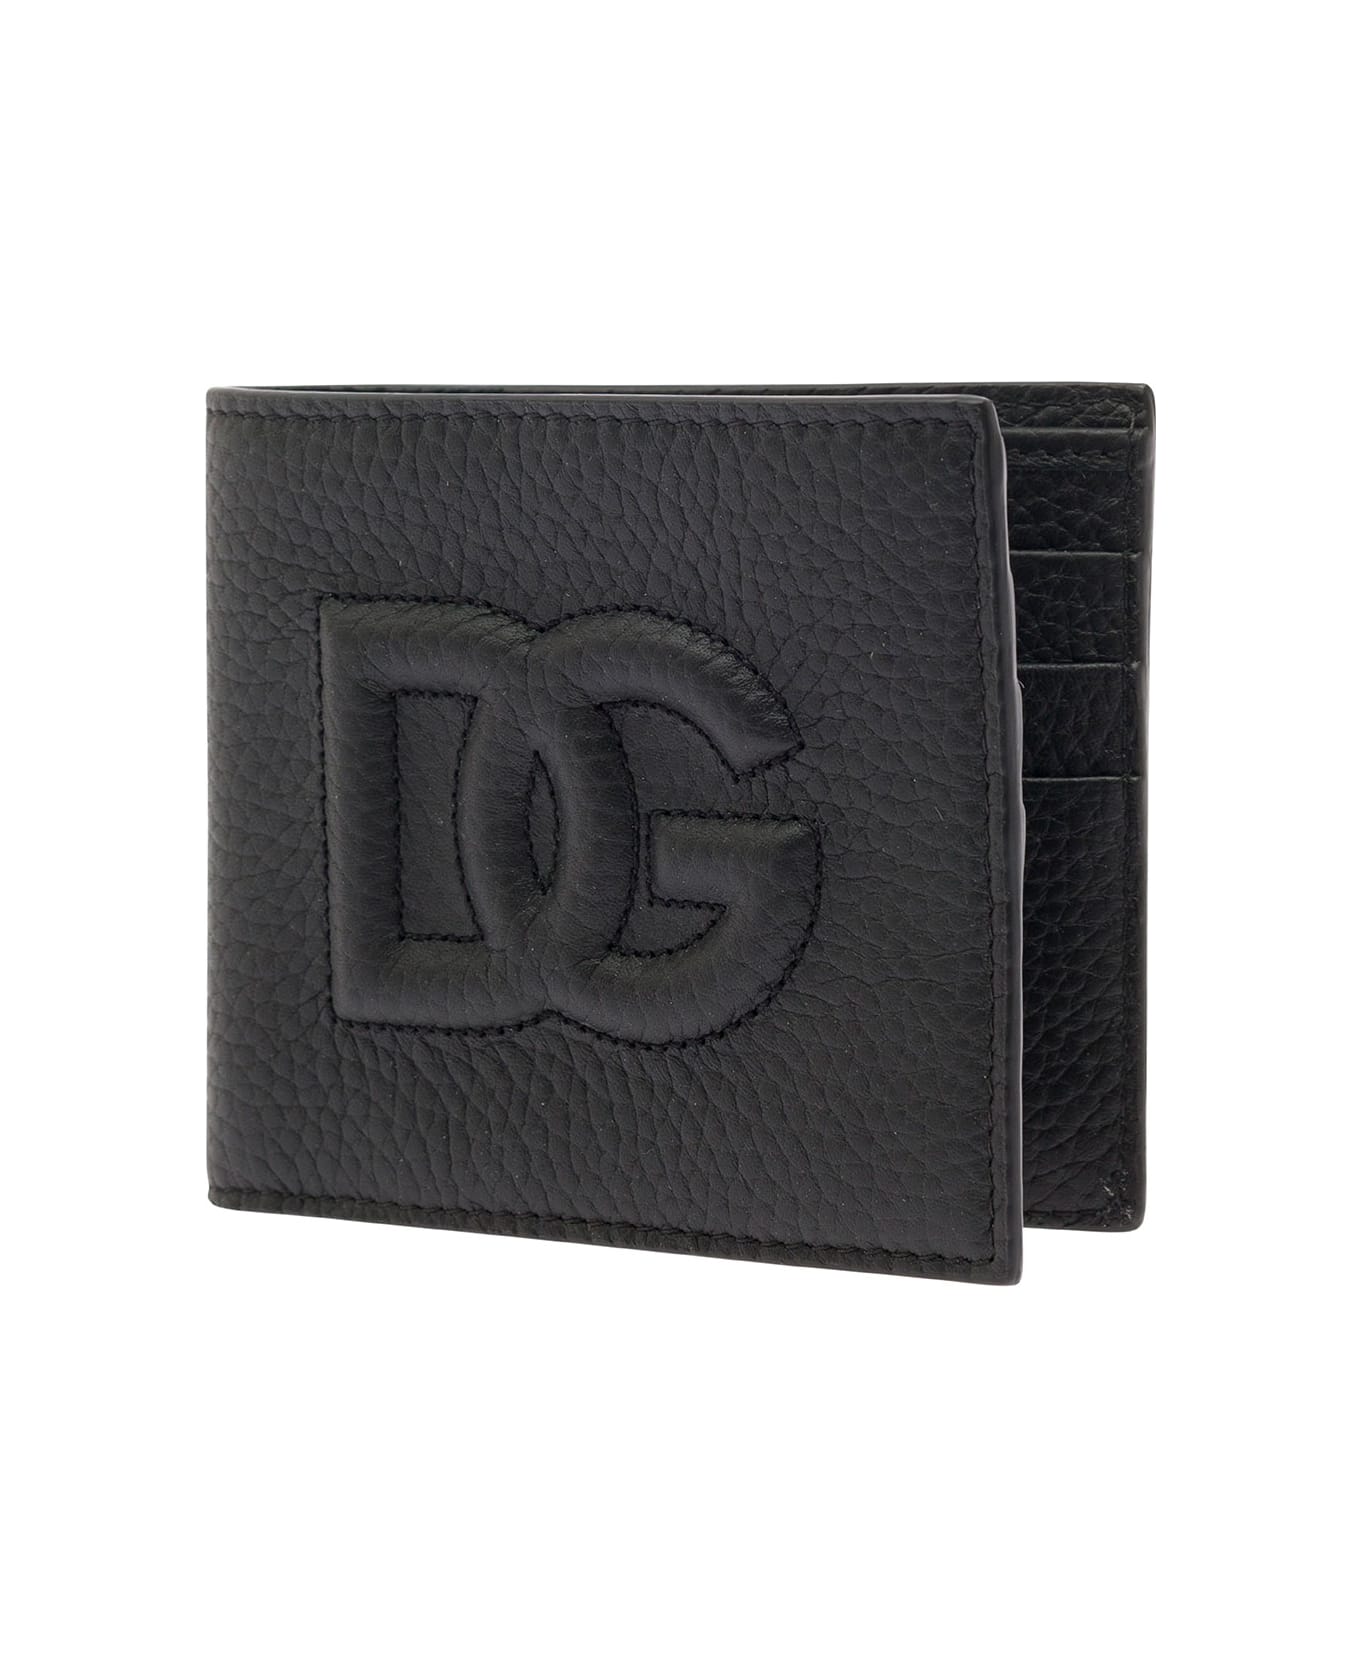 Dolce & Gabbana Black Bifold Wallet With Quilted Leather In Leather Man - Black 財布